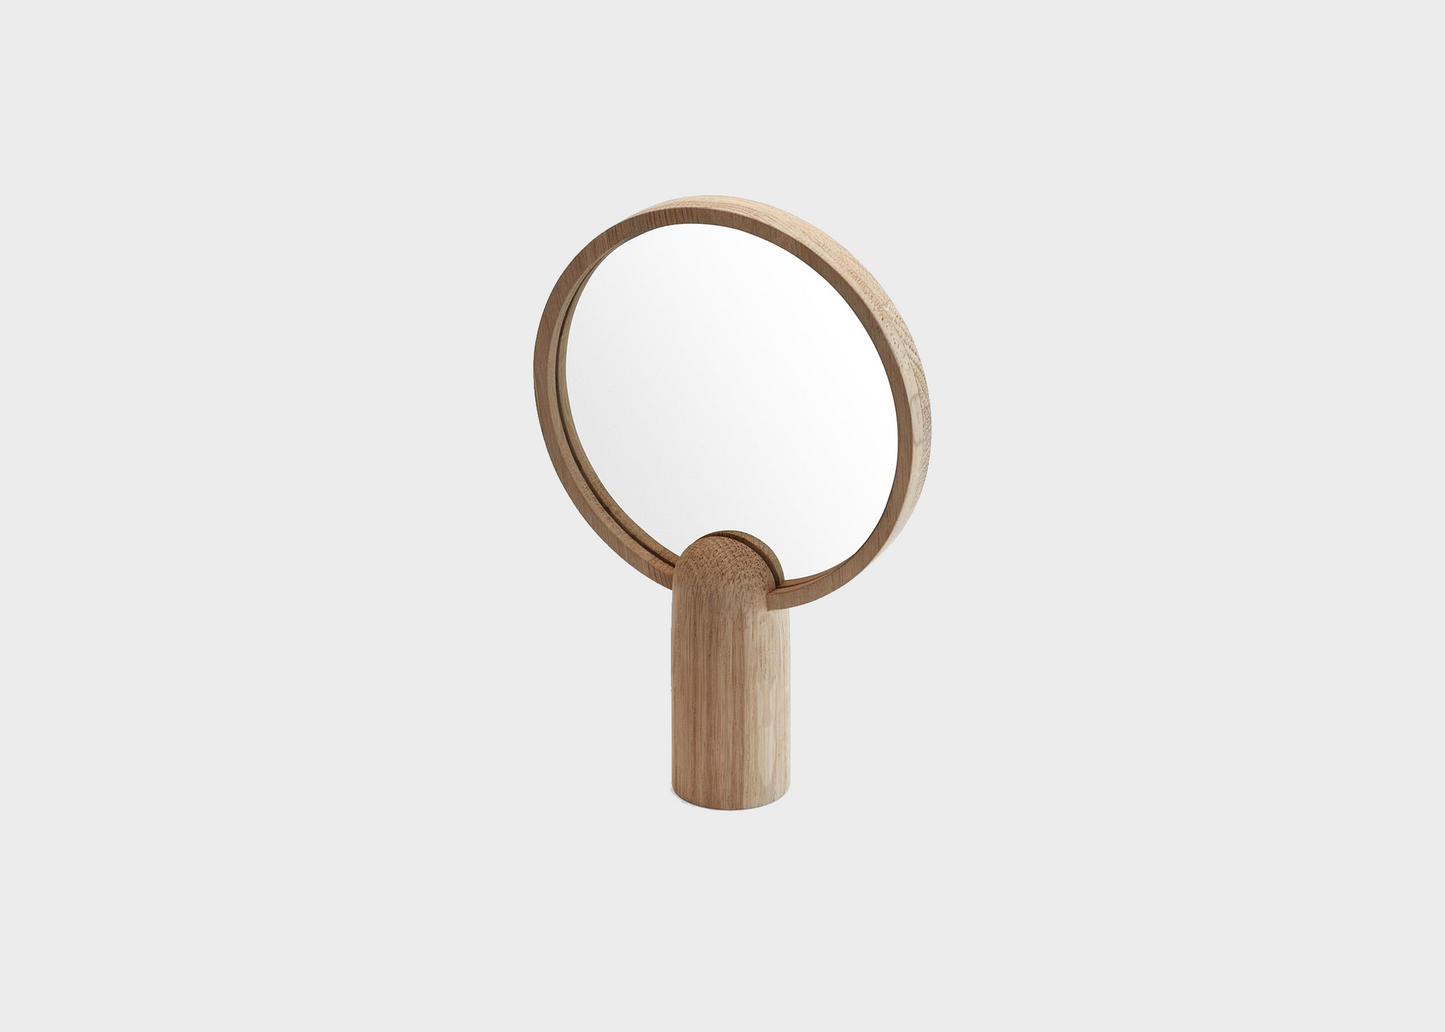 The round handheld small Aino mirror by Ferm Living